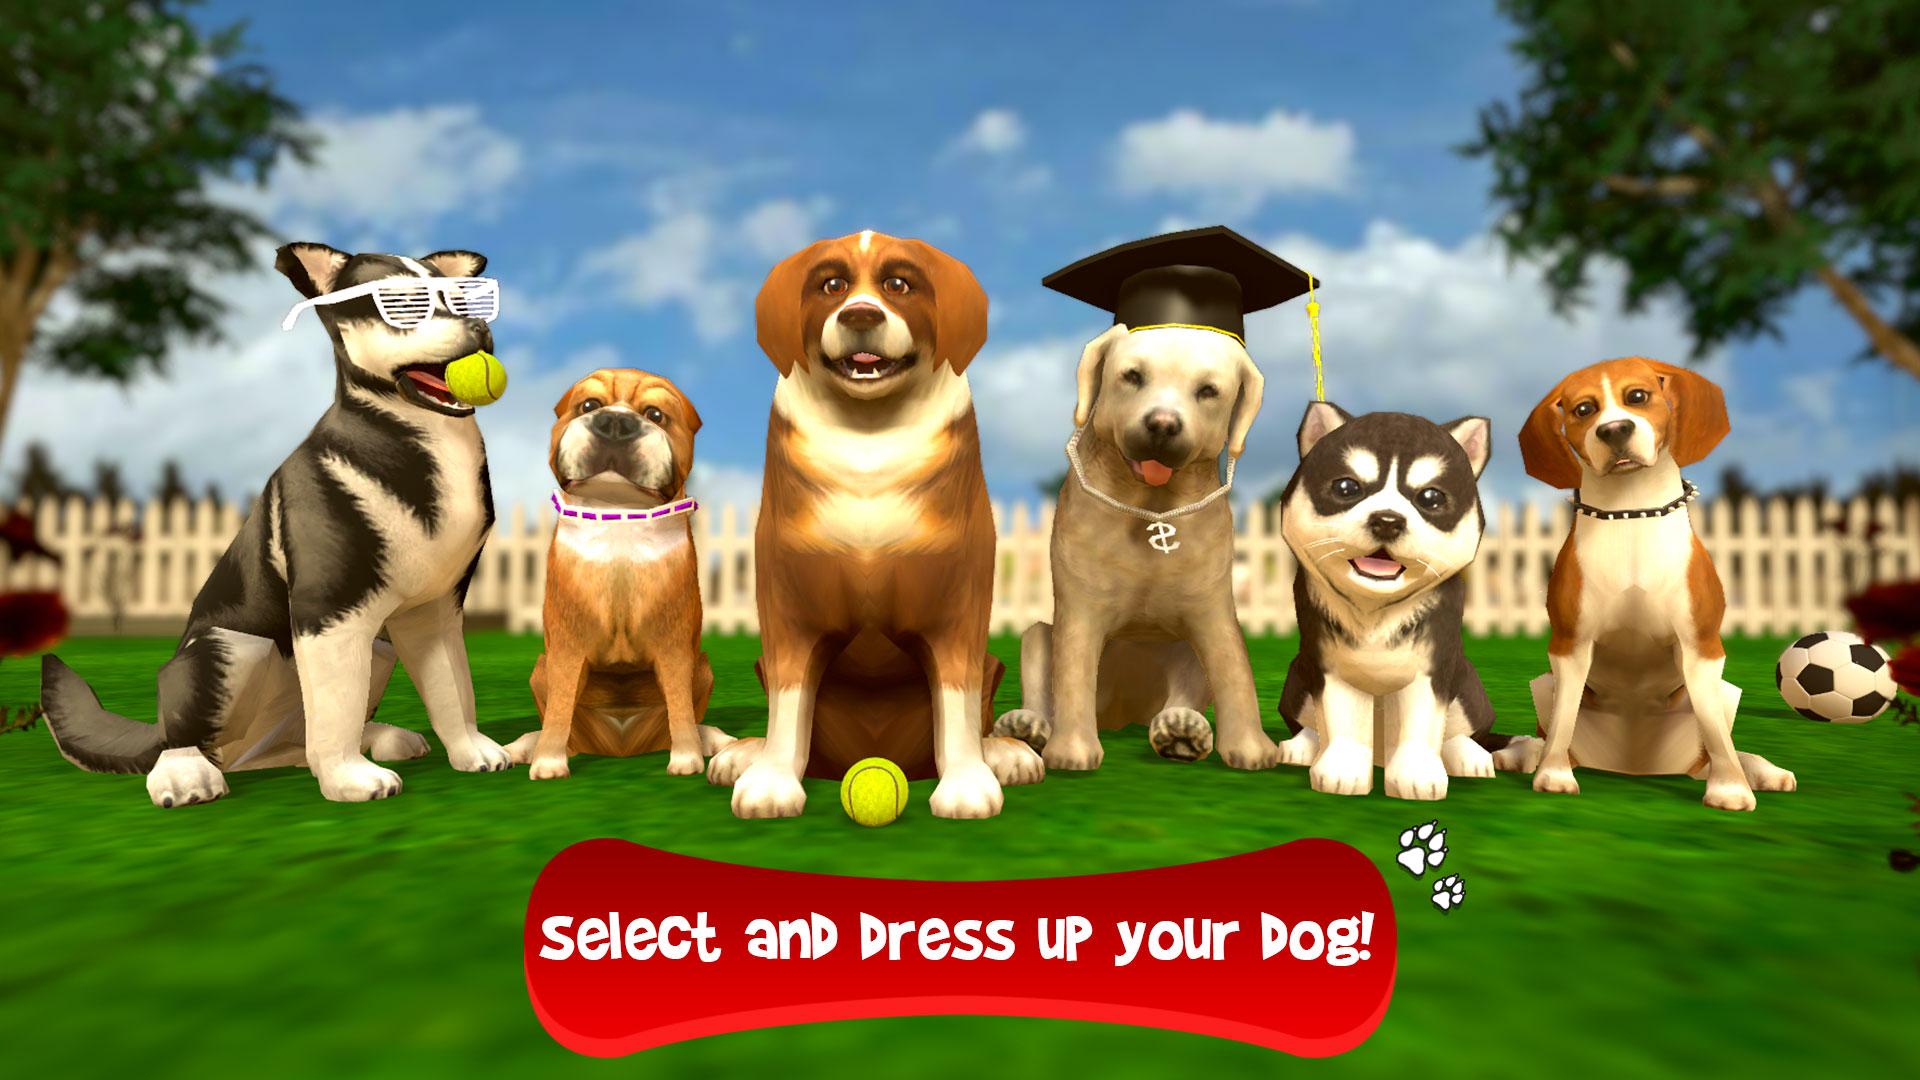 Virtual Puppy Simulator for Android